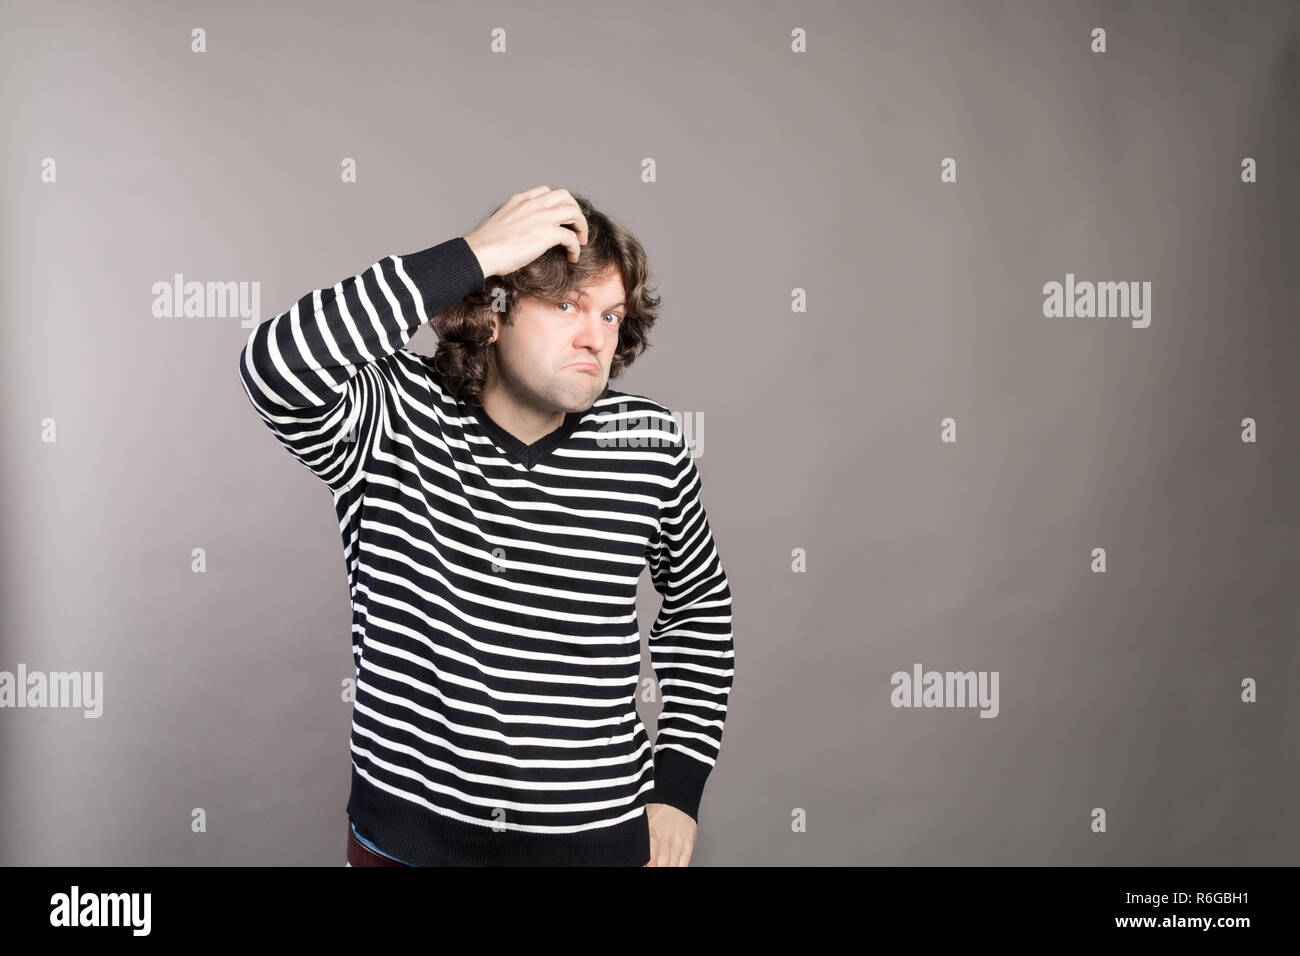 Puzzled guy with messy hair, frowning and looking unsatisfied scratching head, thinking deeply about something on grey wall background. Human facial expression, emotion, feeling, sign body language Stock Photo